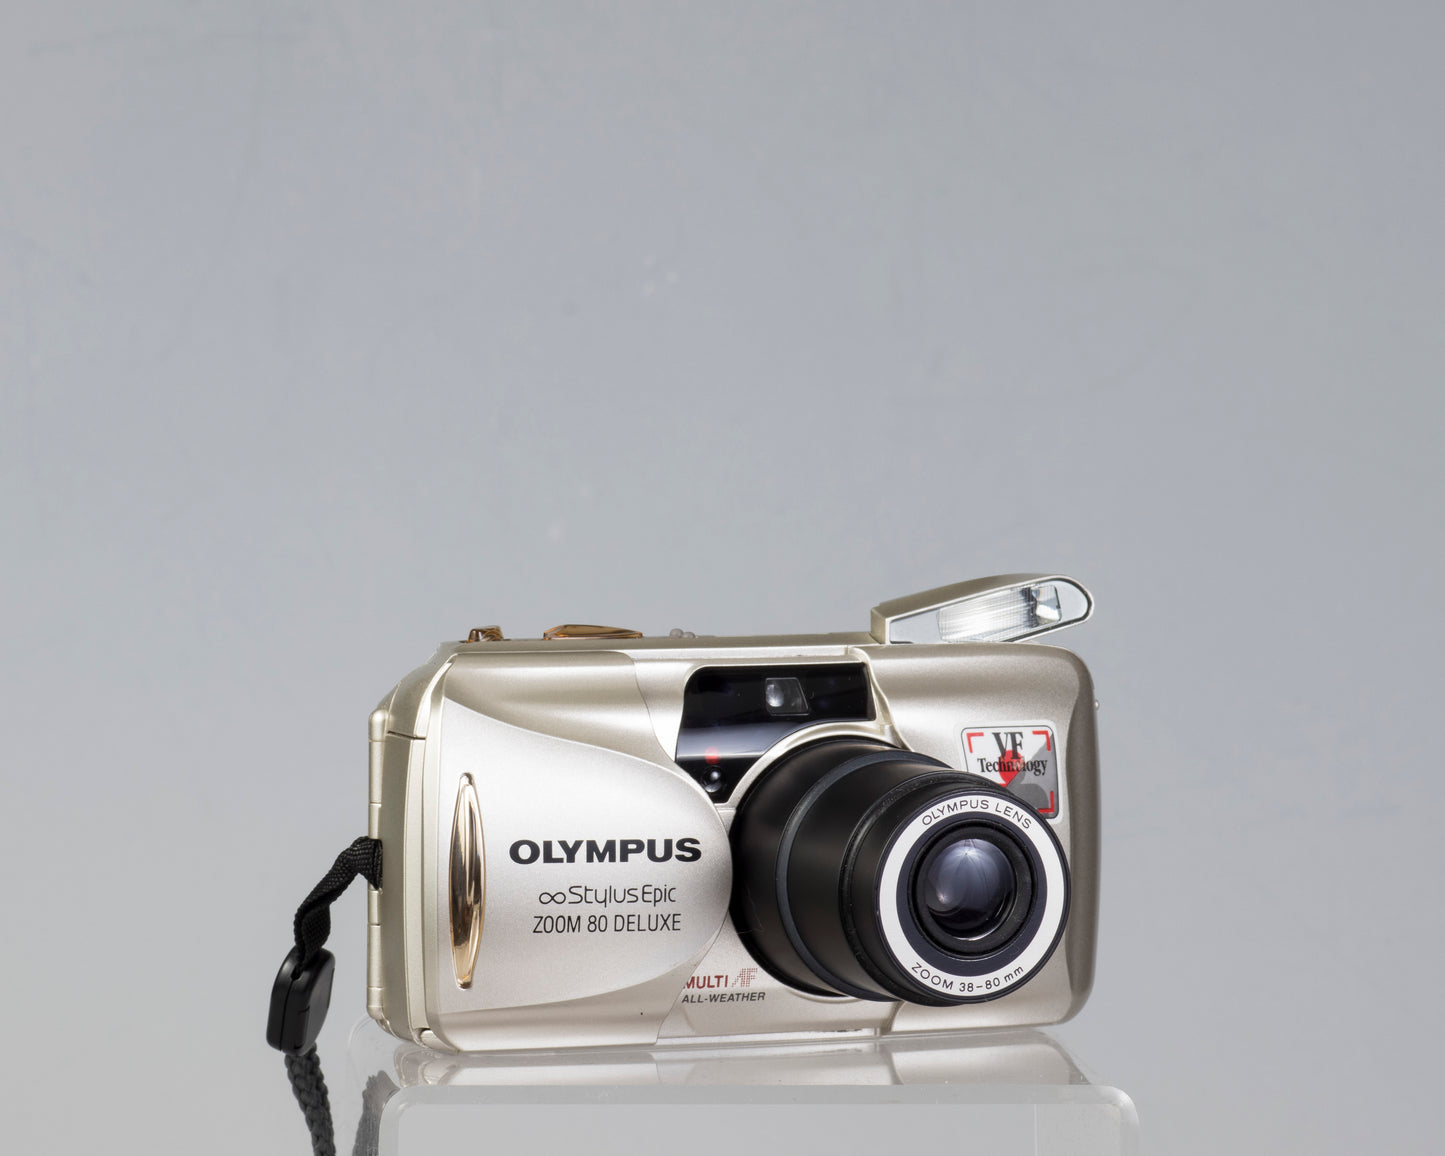 The Olympus Infinity Stylus Epic oom 80 Deluxe (lens zoomed)